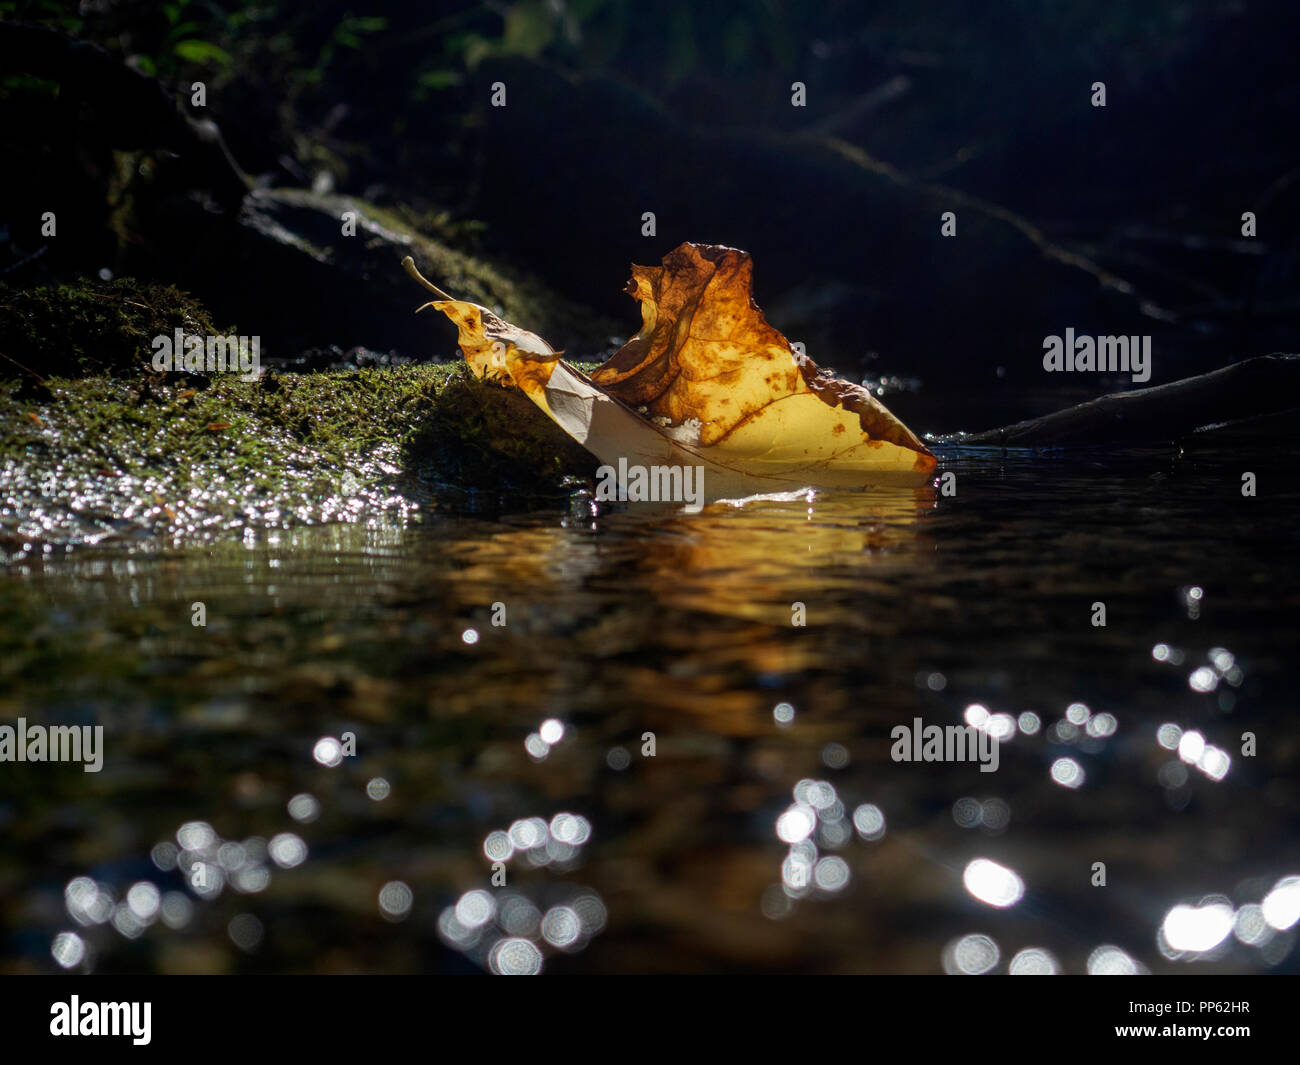 A half-submerged leaf is brightly lit by the sun in the waning days of summer. Stock Photo